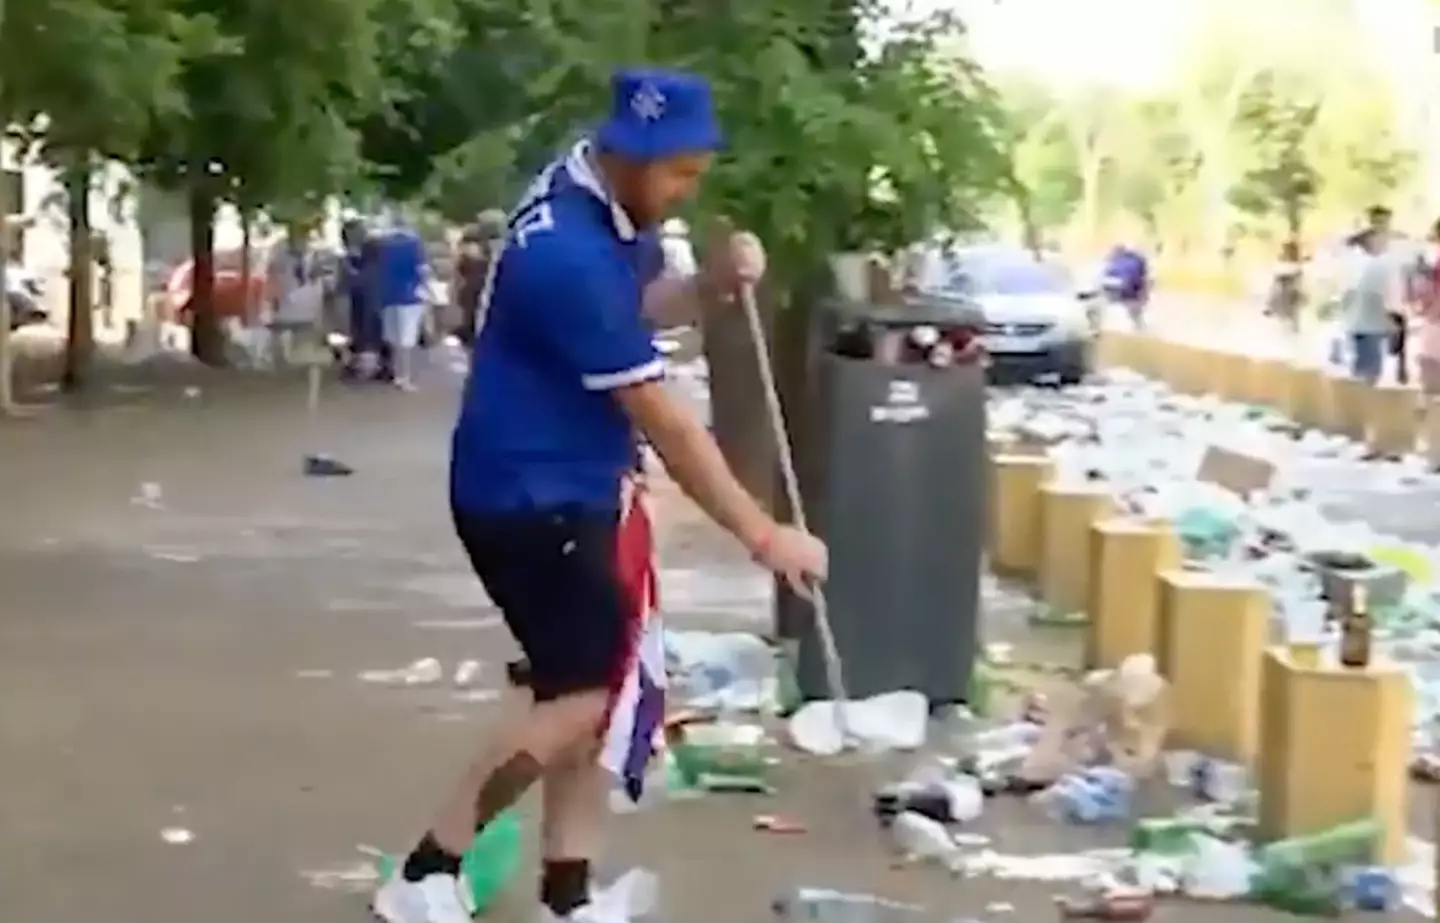 Rangers fans were praised for helping to clean up Seville.